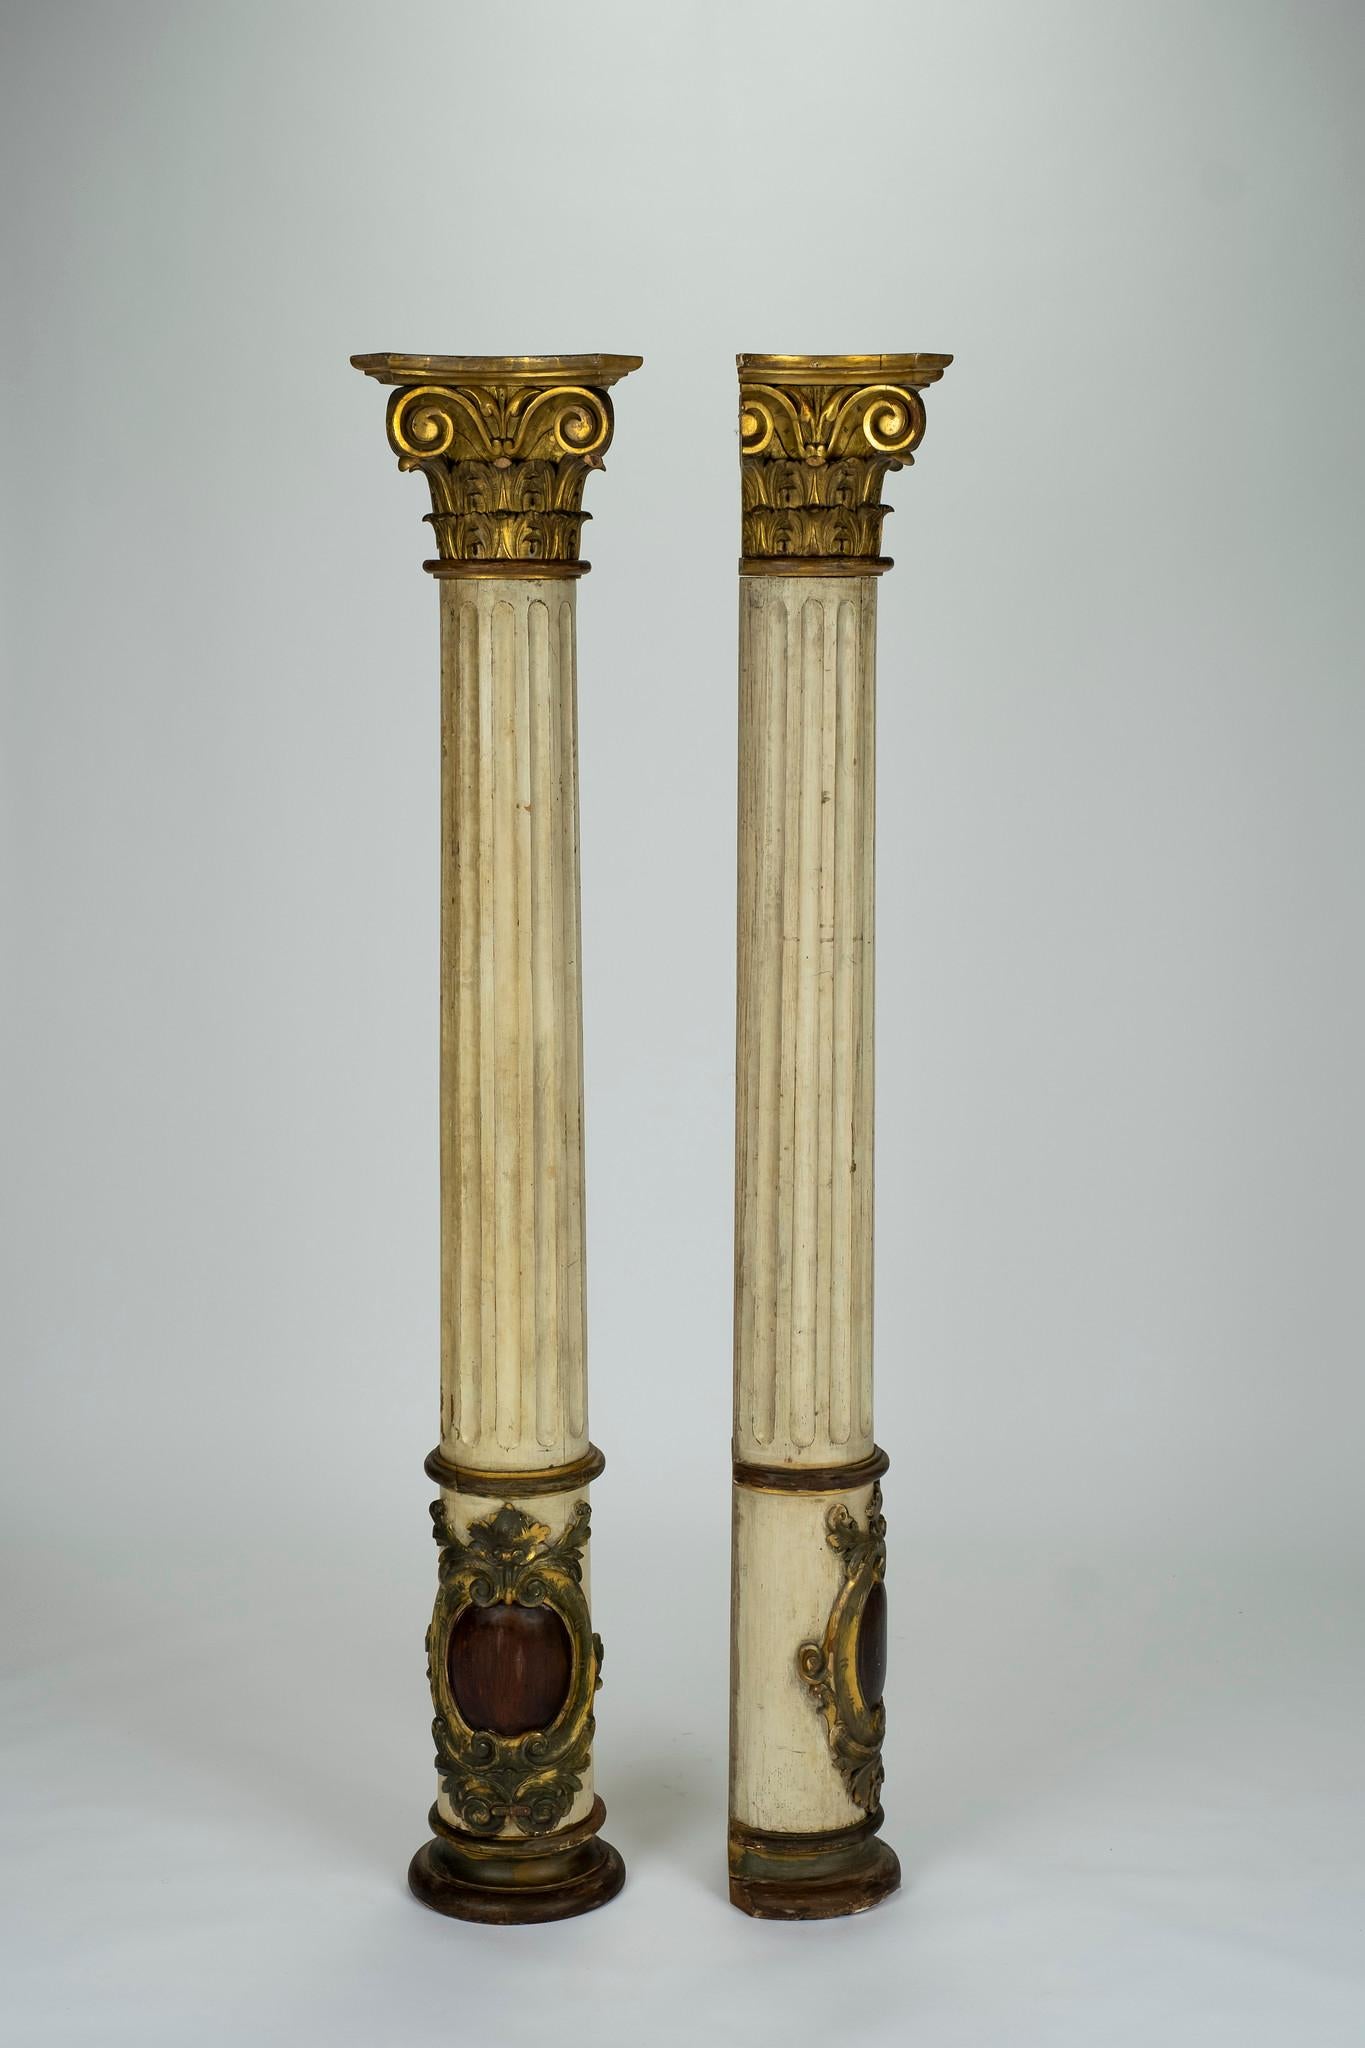 Pair of 19th century French columns. Paint and gilded oak hardwoods with Ionic capitals, fluting and classical detailing.
 
  